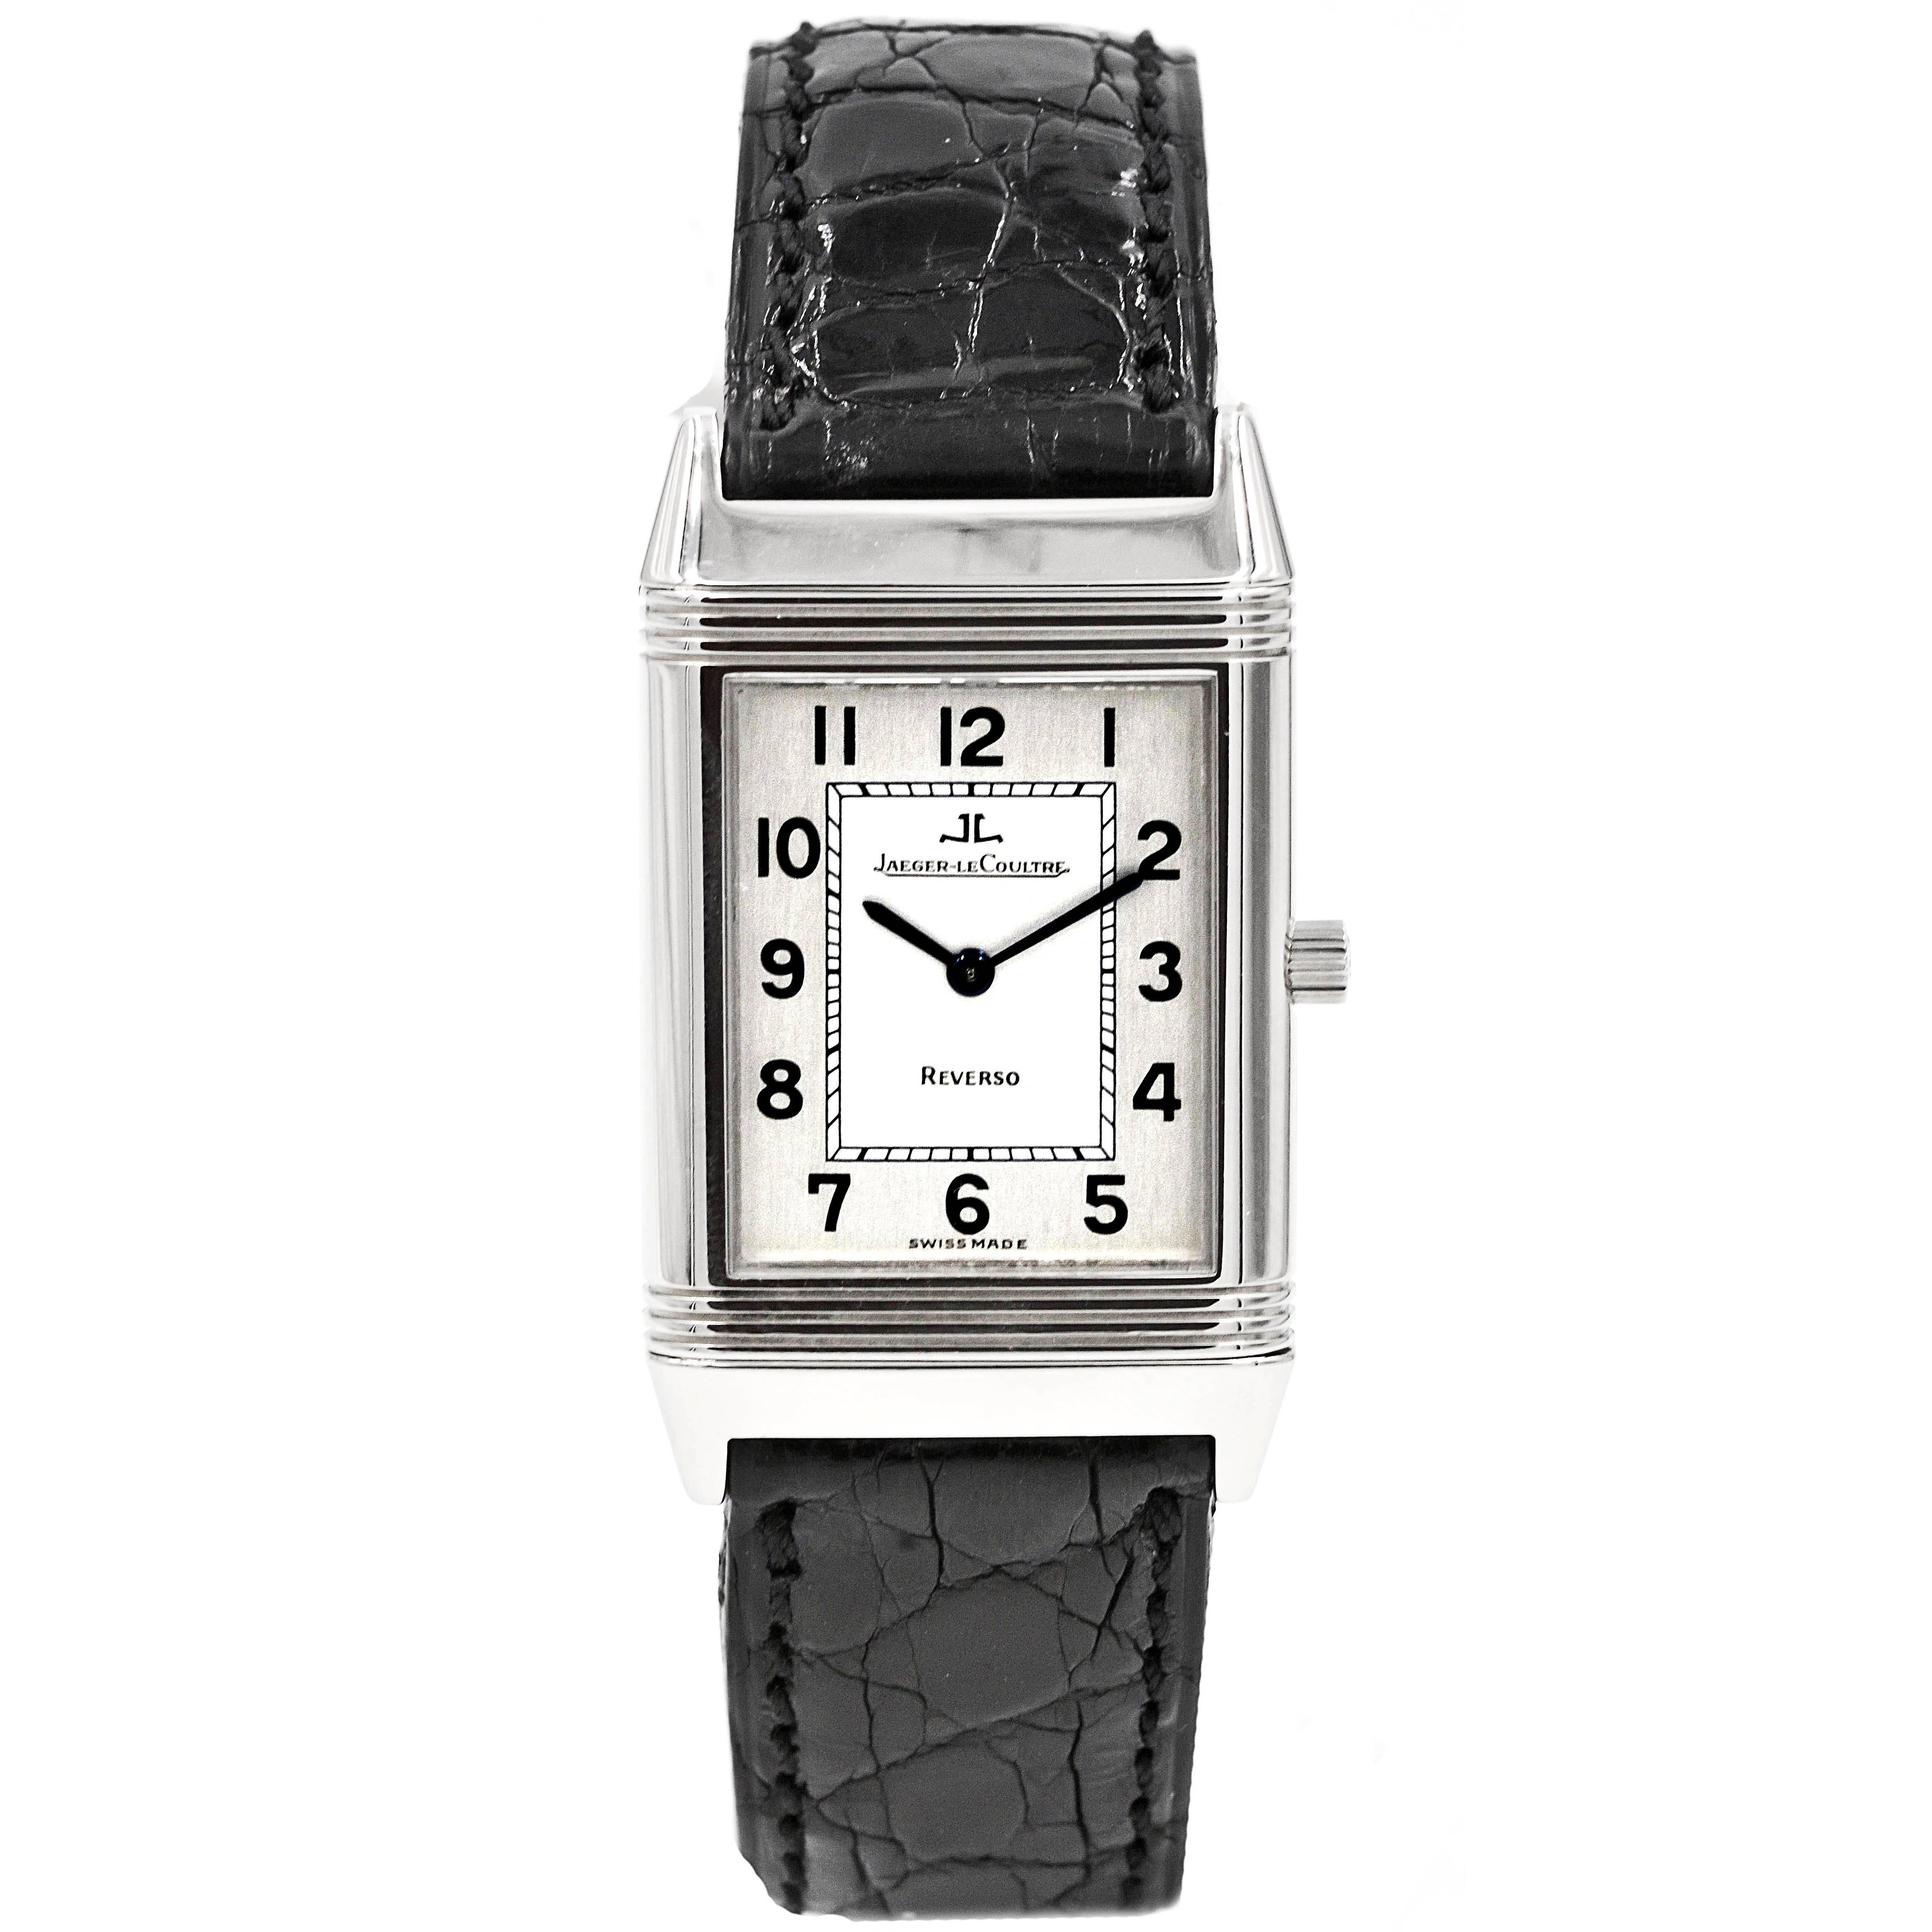 Jaeger LeCoultre Stainless Steel Reverso Classic Manual Wind Wristwatch